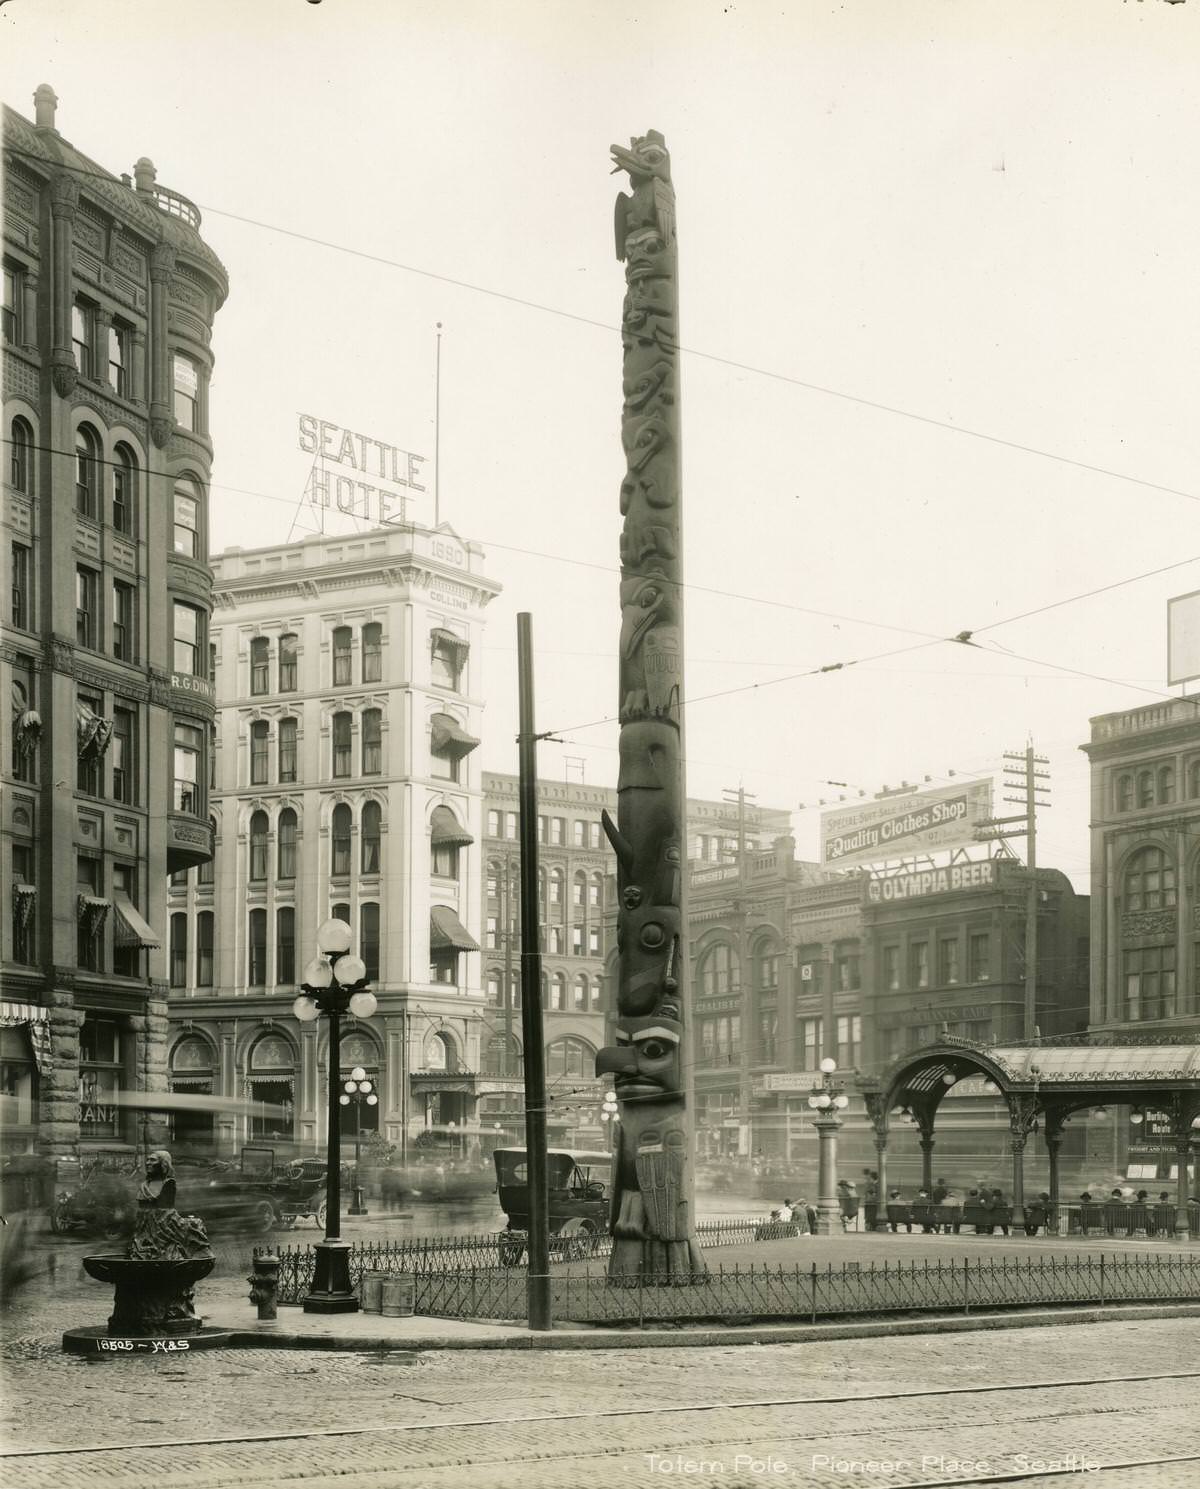 Totem pole, Pioneer Place, Seattle, 1900